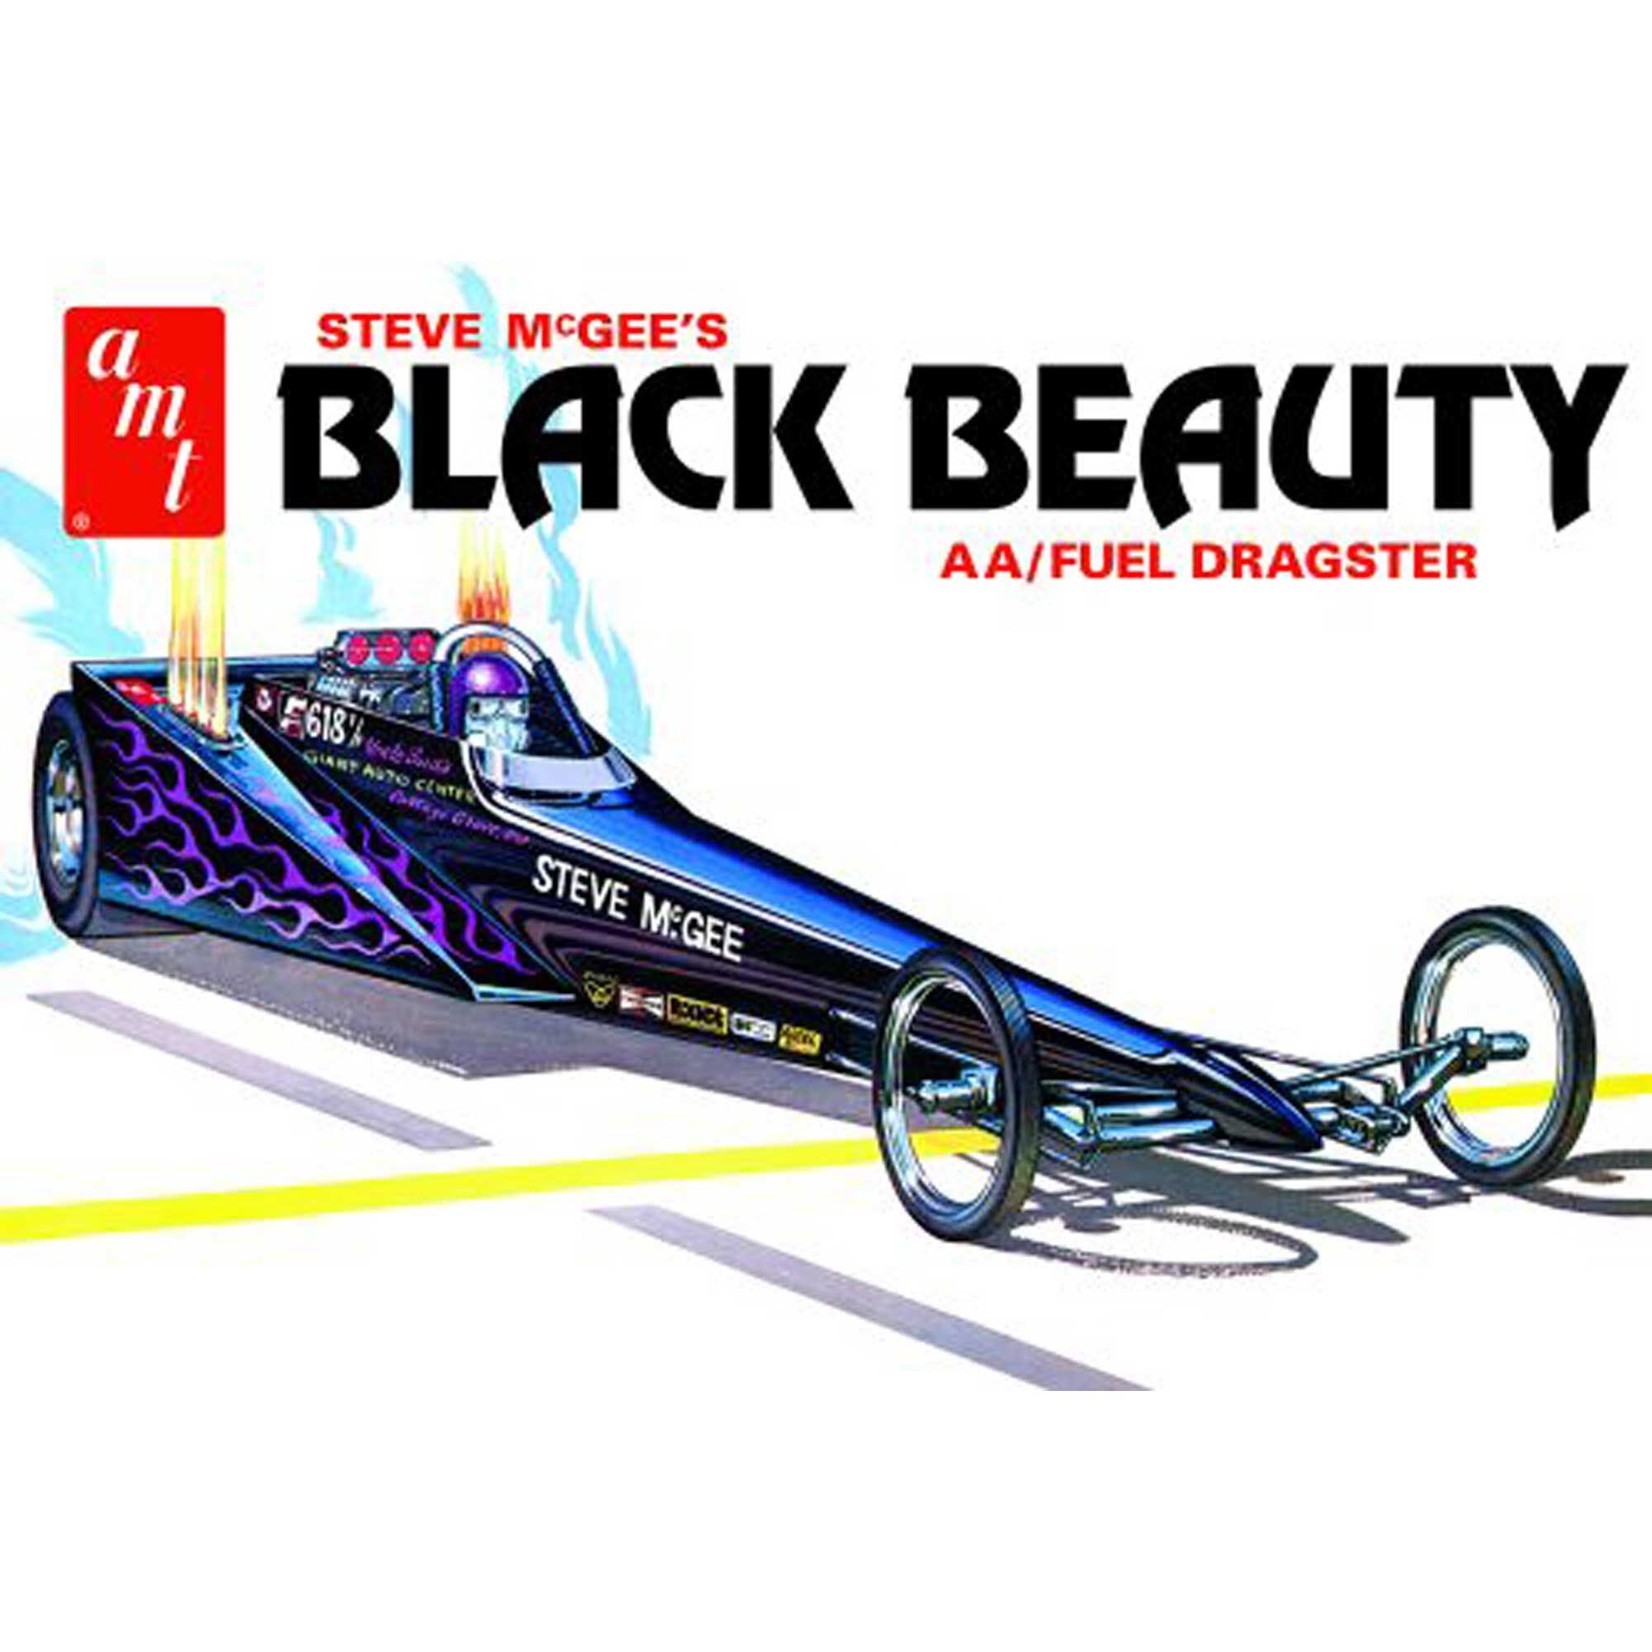 AMT 1/25 Steve McGee Black Beauty Wedge Dragster